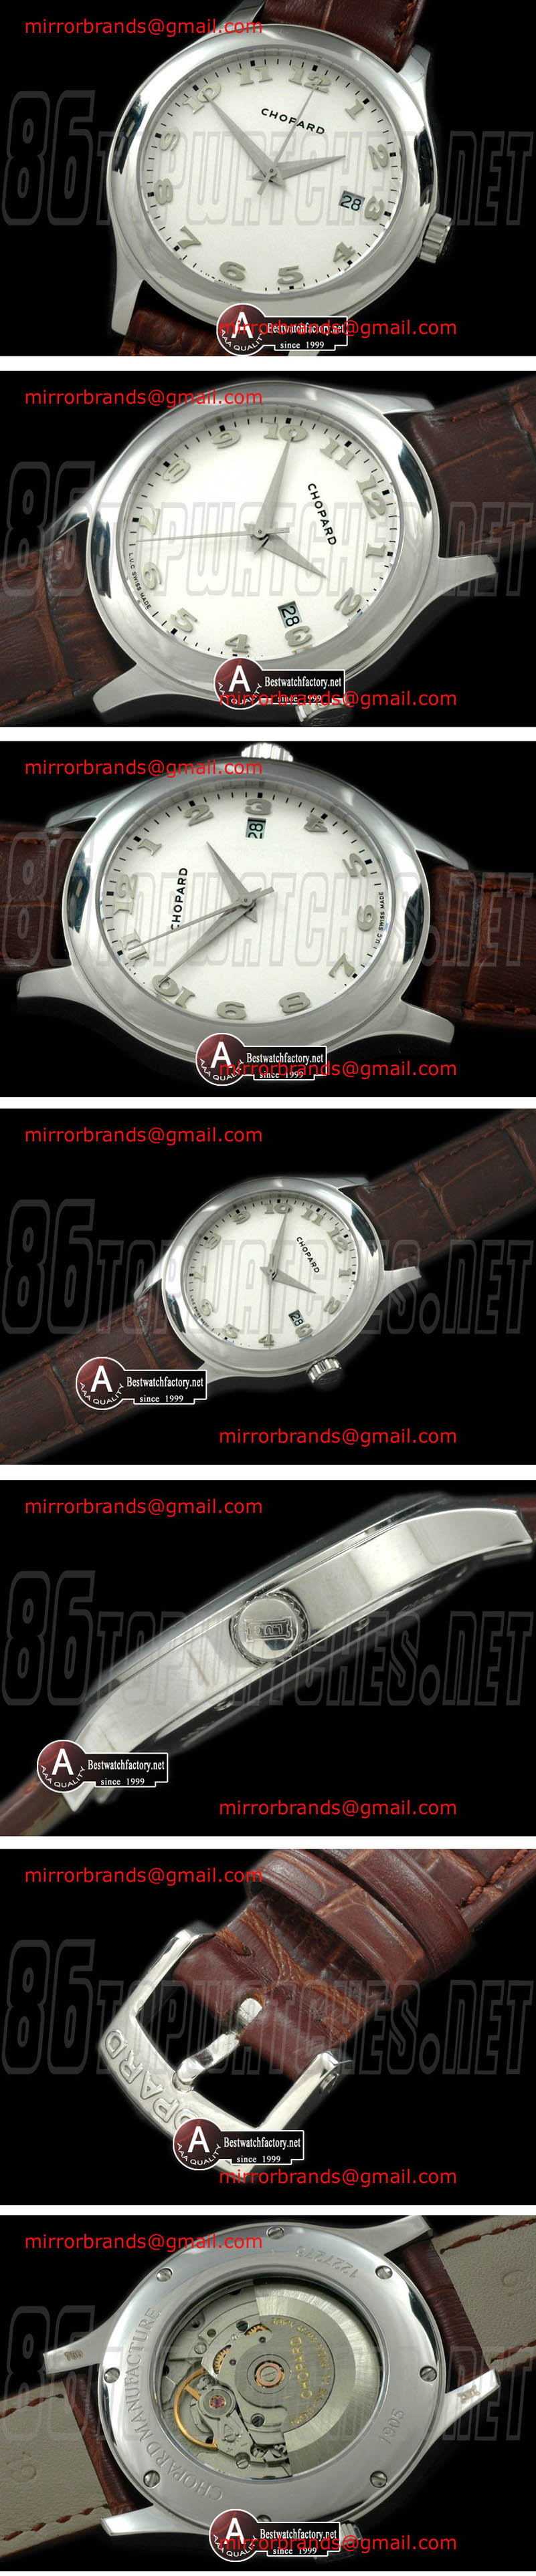 Luxury Chopard LUC Automatic SS/Leather White Asia 2824